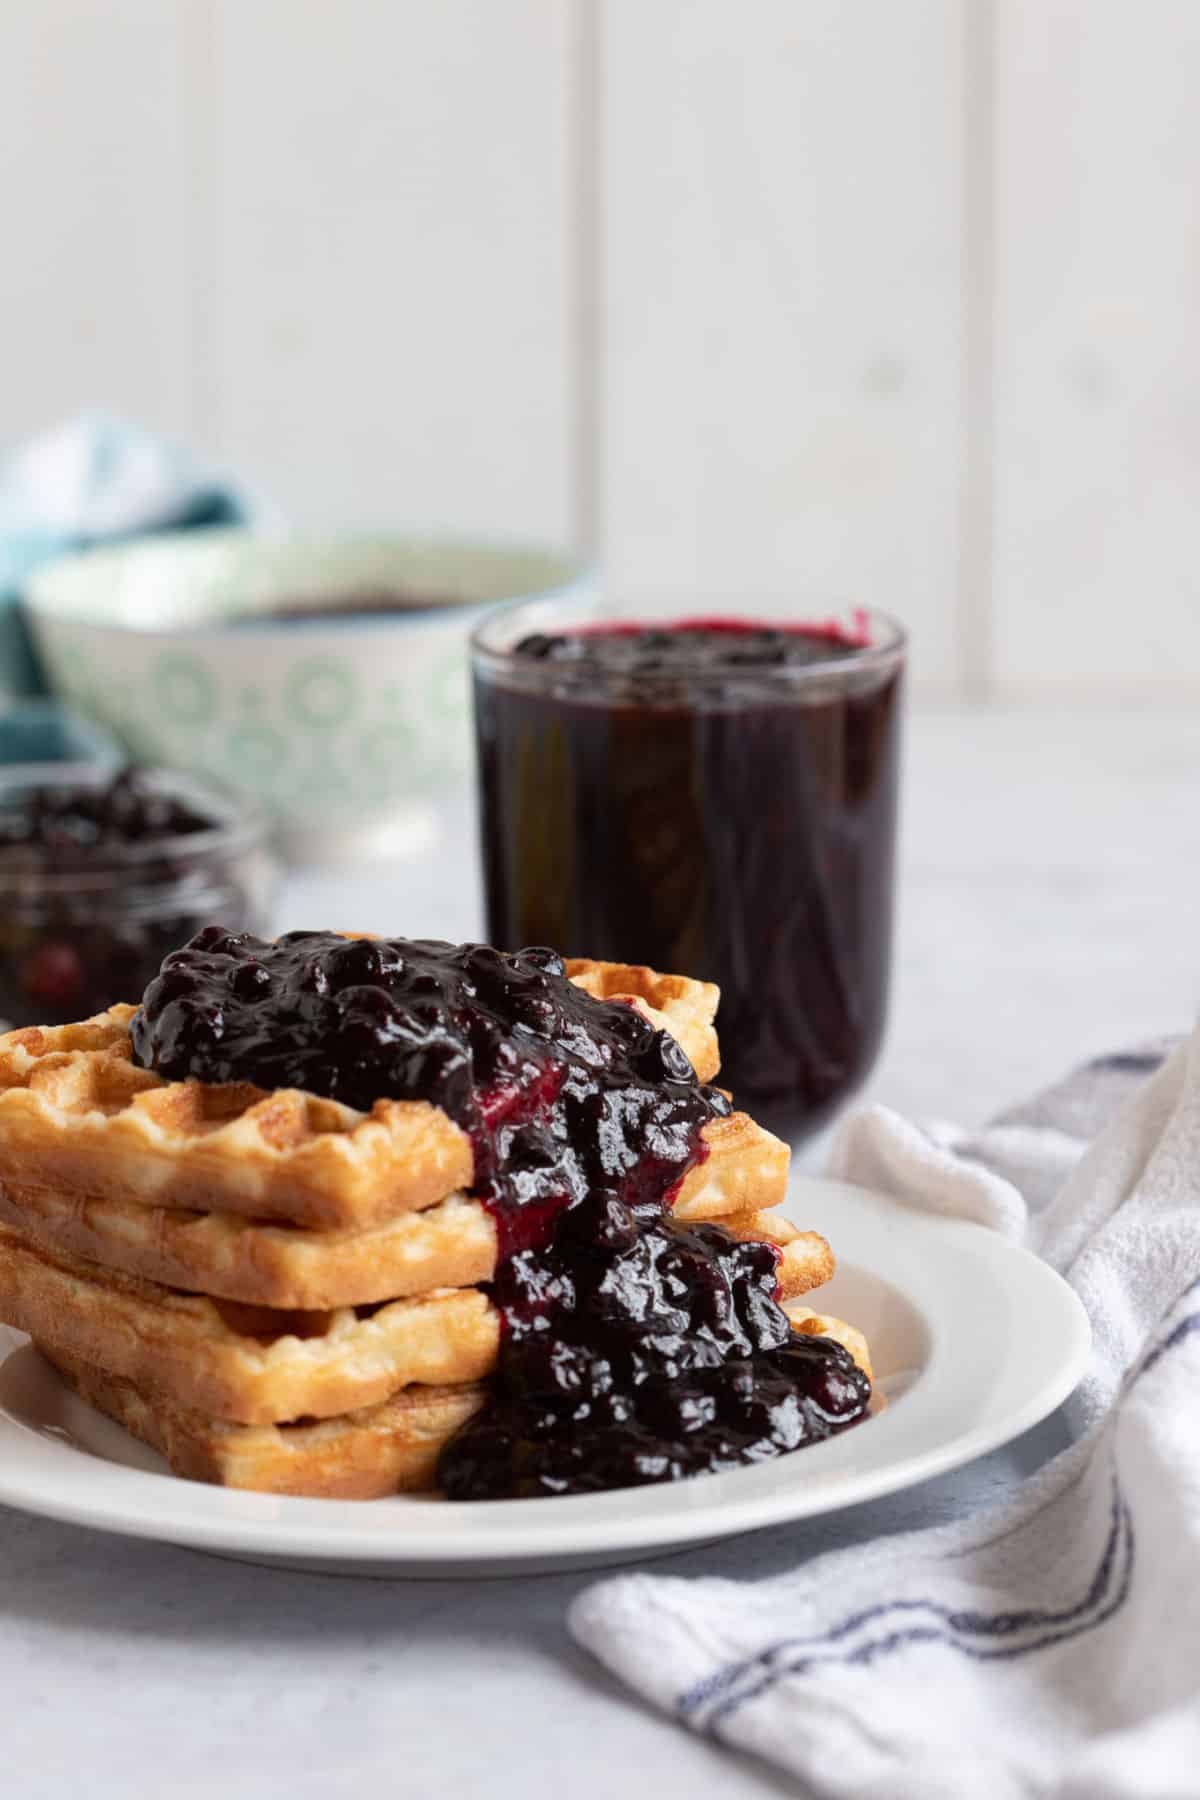 Blackcurrant compote on a stack of waffles.